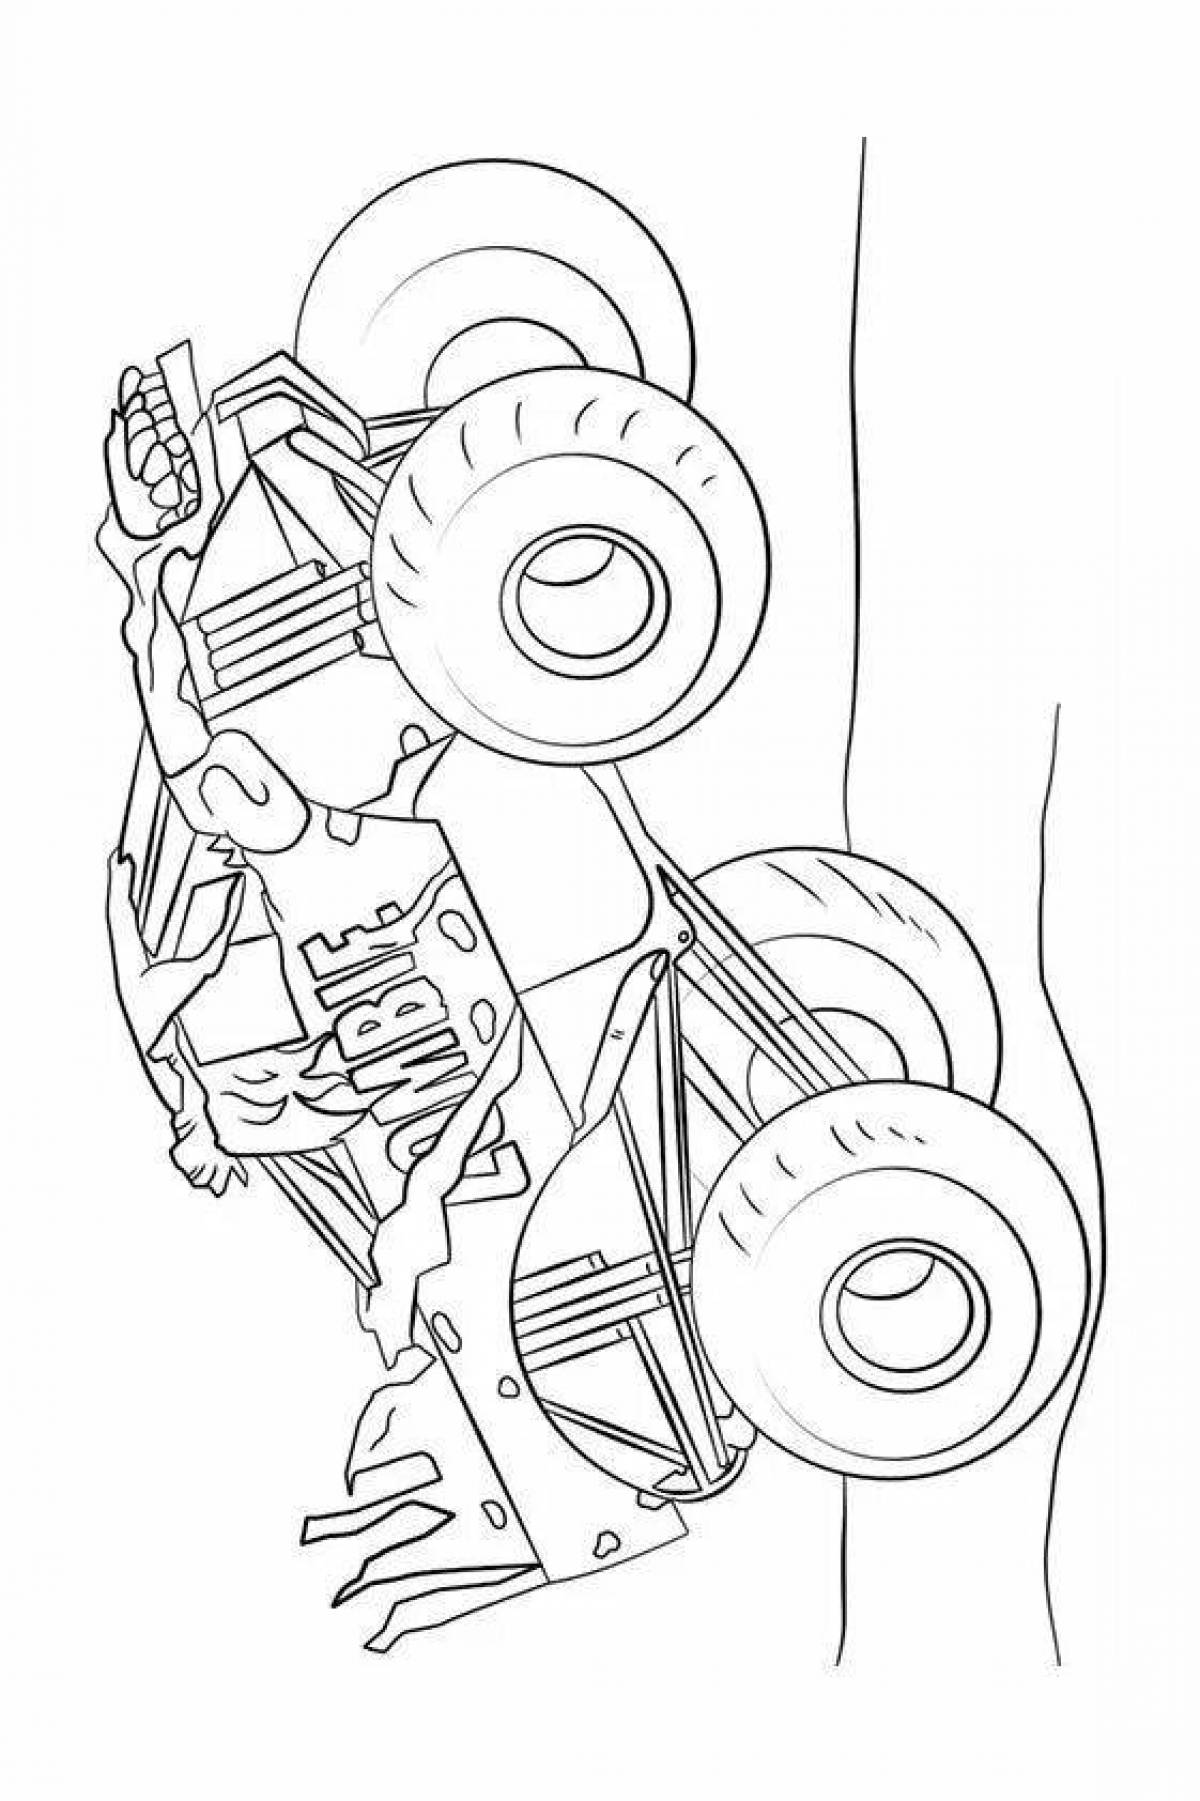 Amazing fusion max coloring page